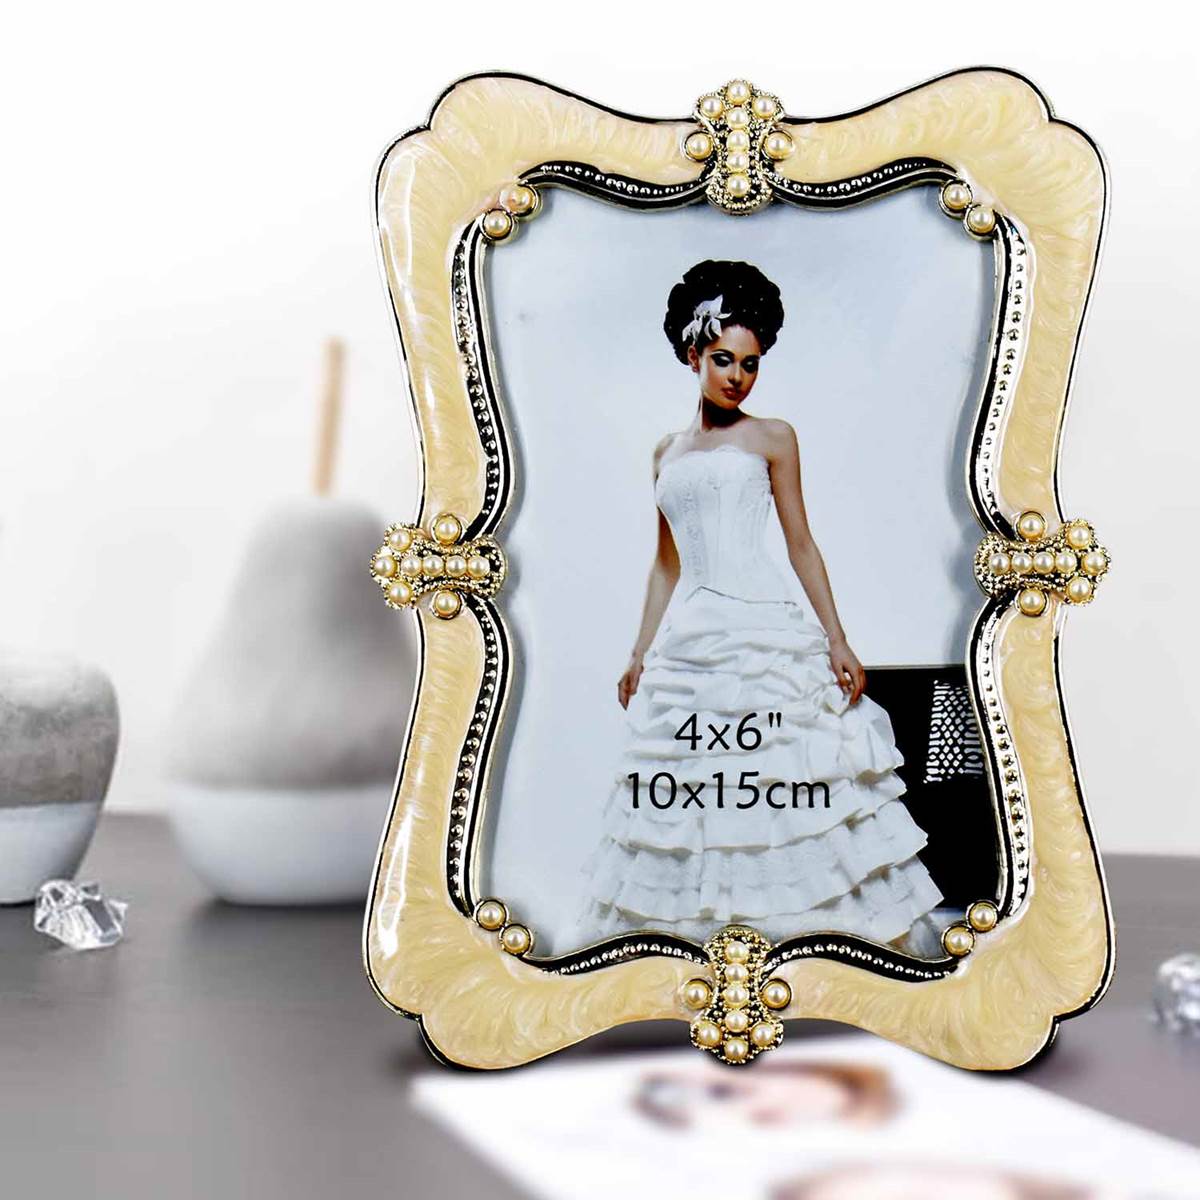 Acrylic Gold textured Photo Frame (4x6) inches (3041-46)